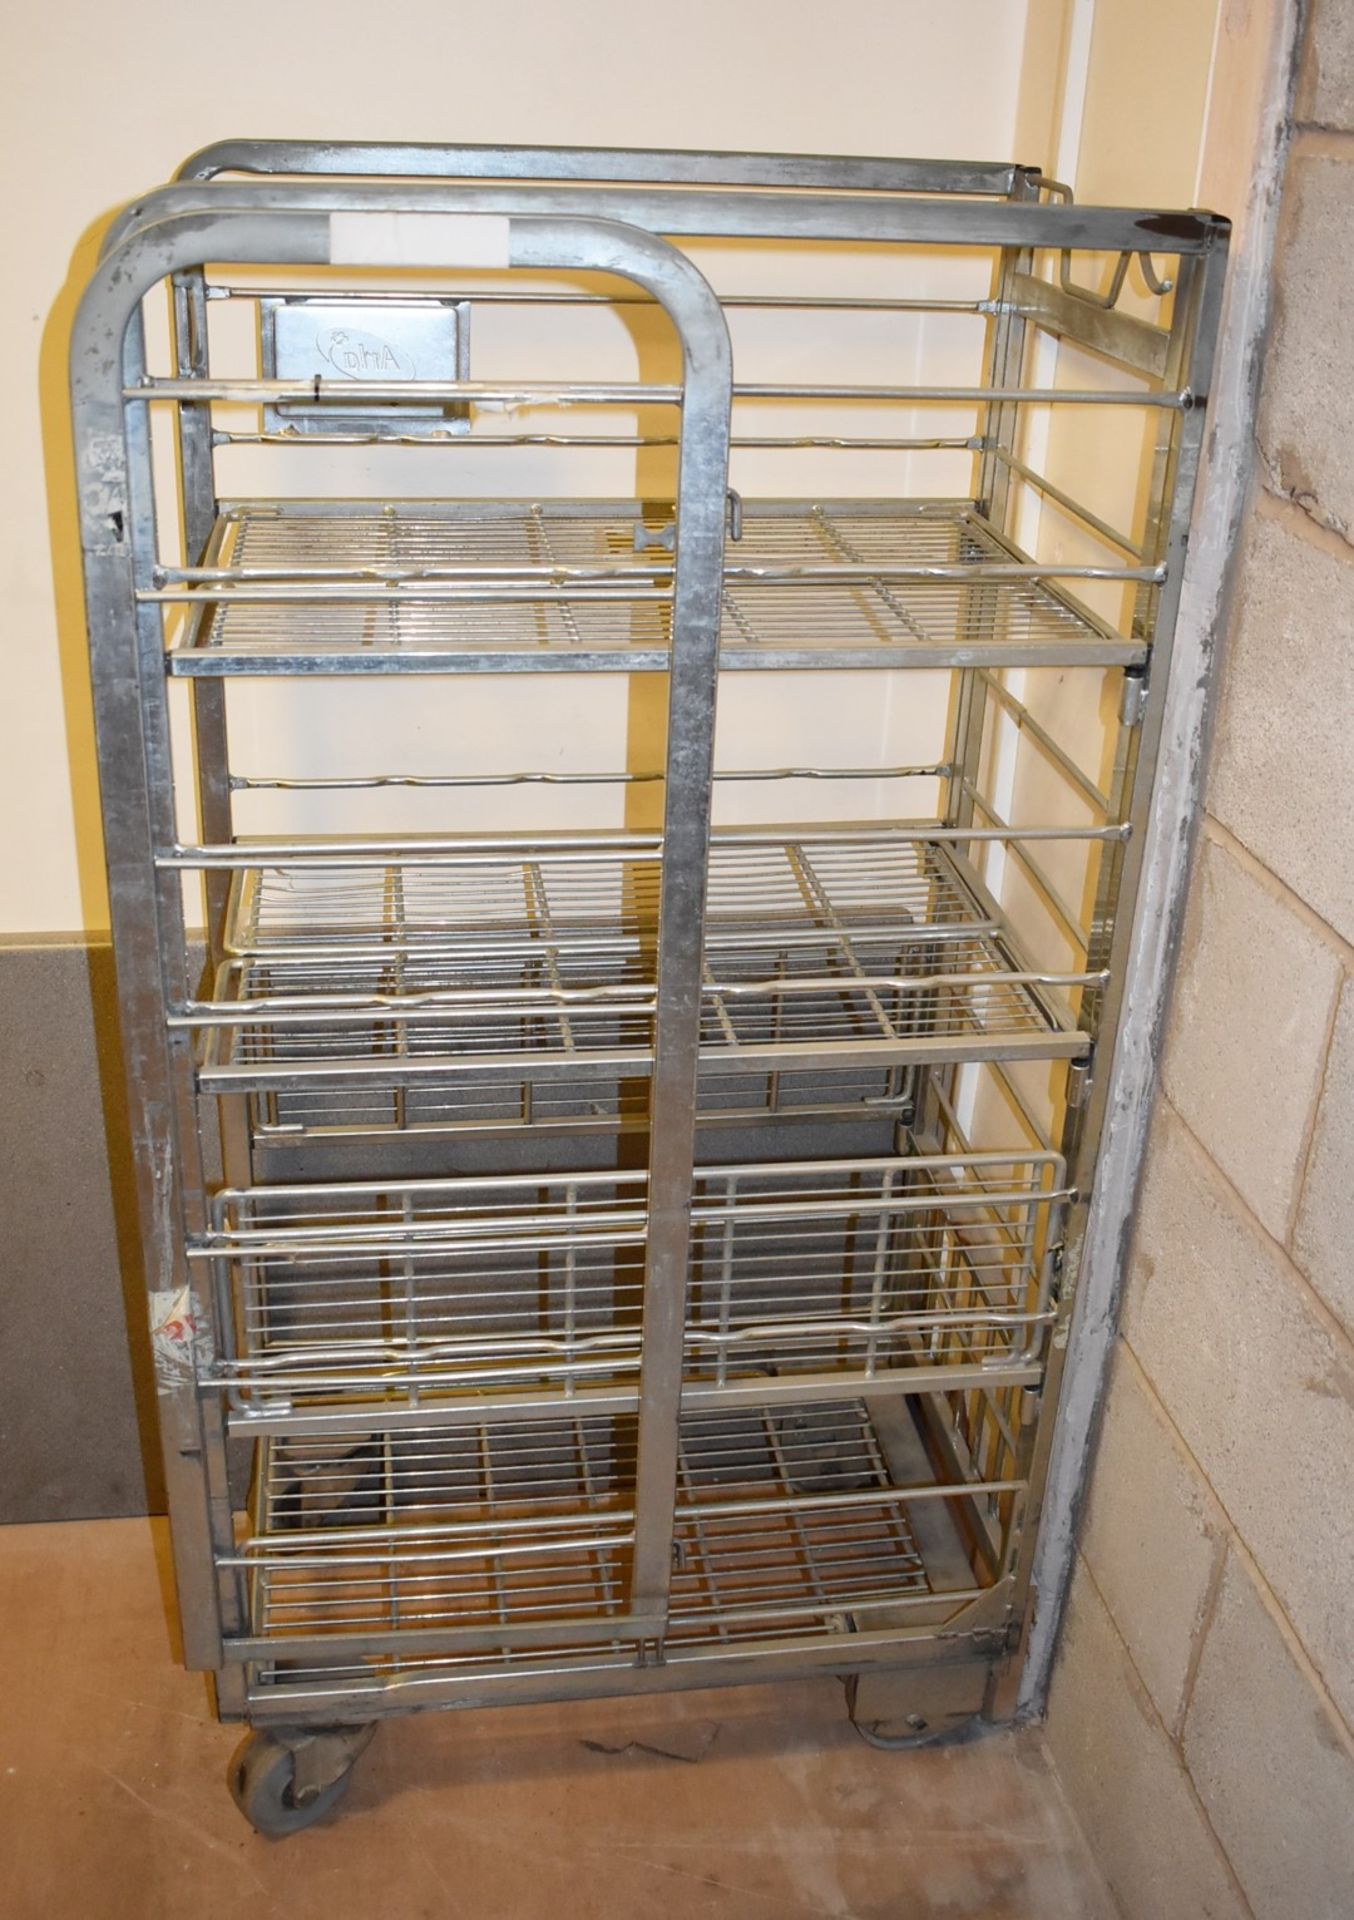 2 x Metal Milk Cage Trolleys - Ref: AC140 GFBR - CL646 - Location: Manchester, M12 Collection - Image 3 of 4